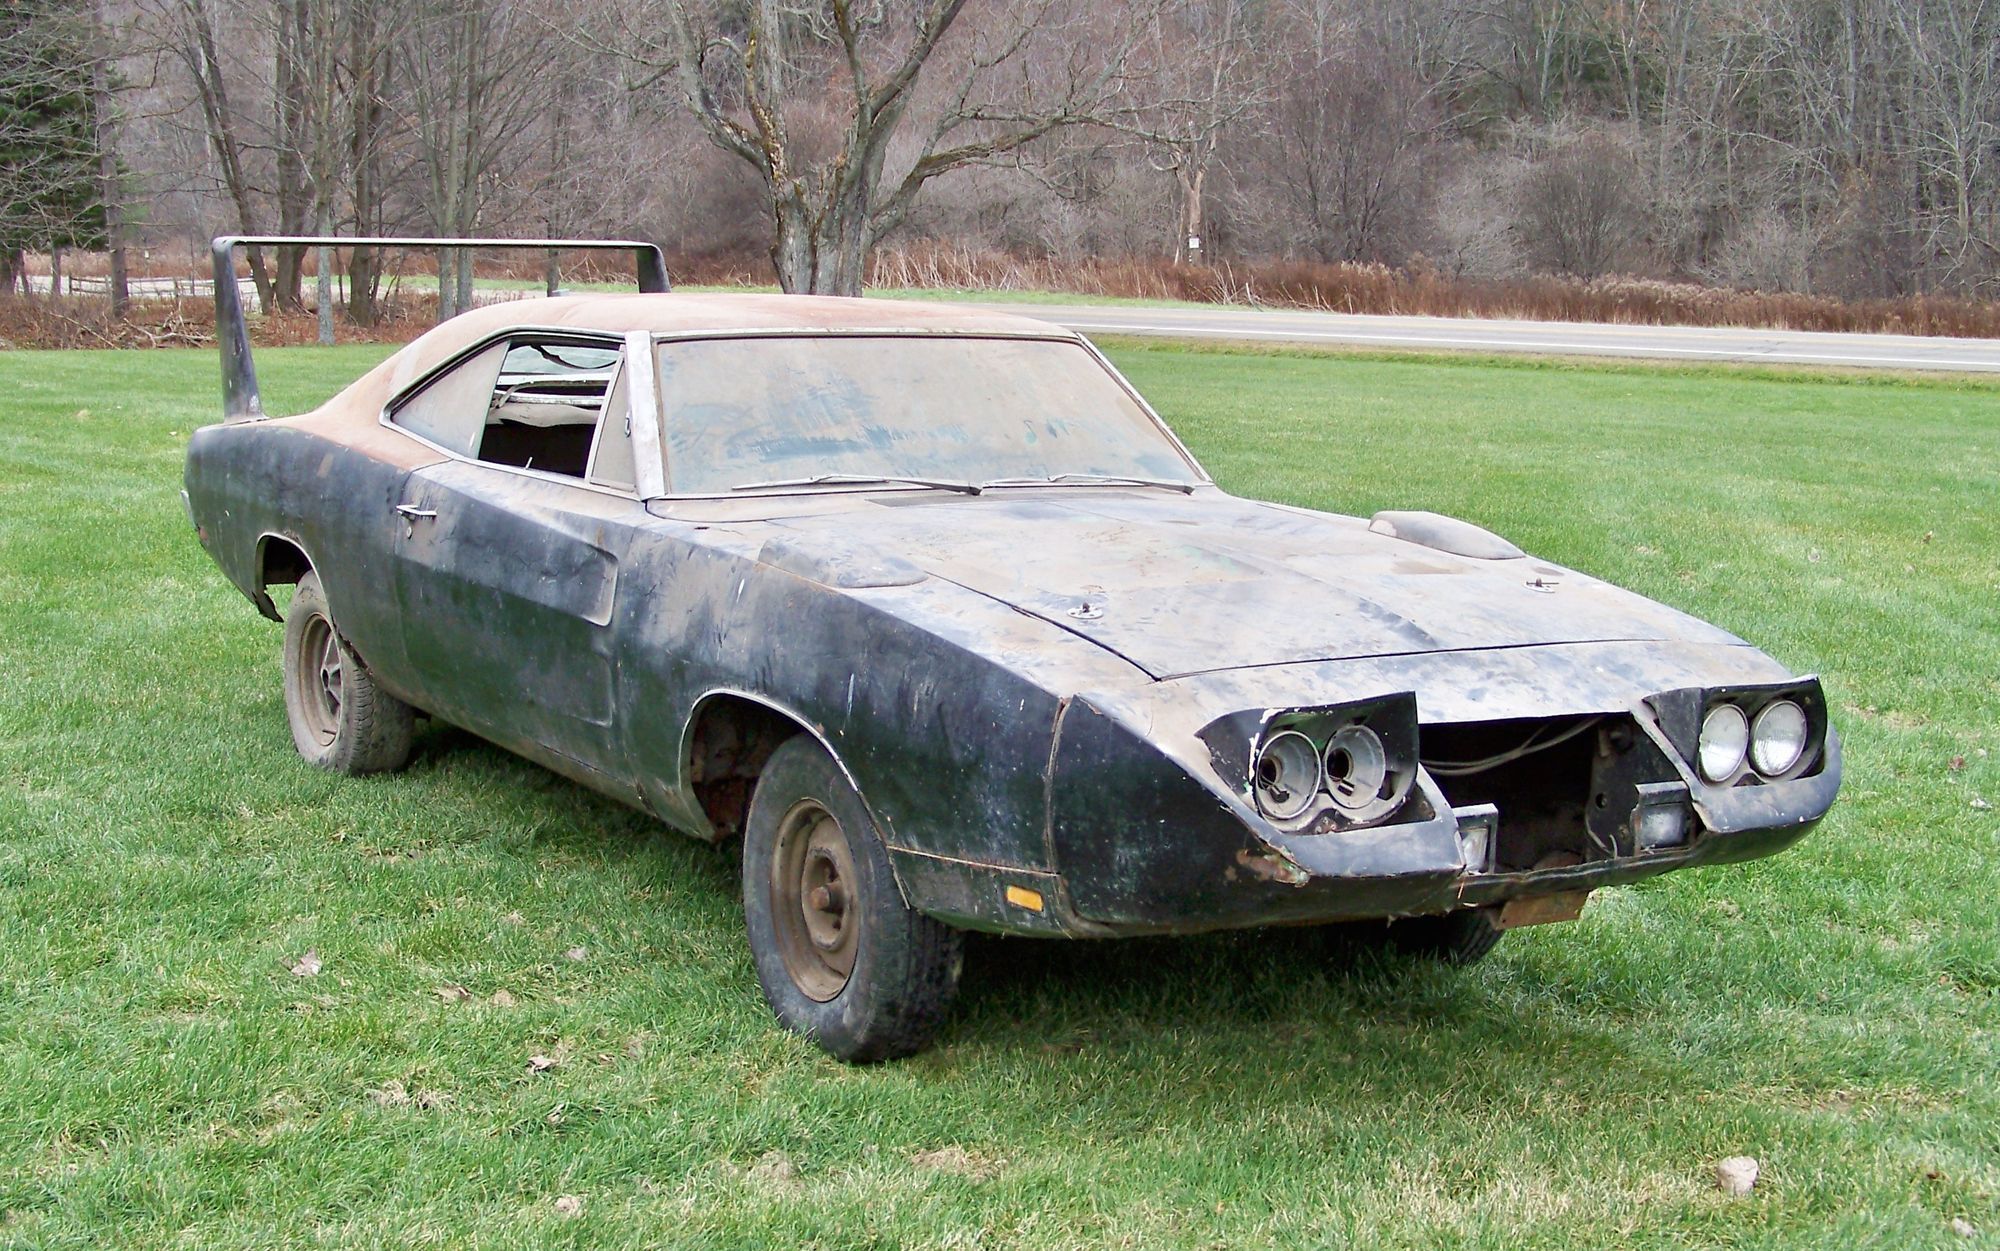 This 1969 Dodge Charger Daytona gets a new lease on life